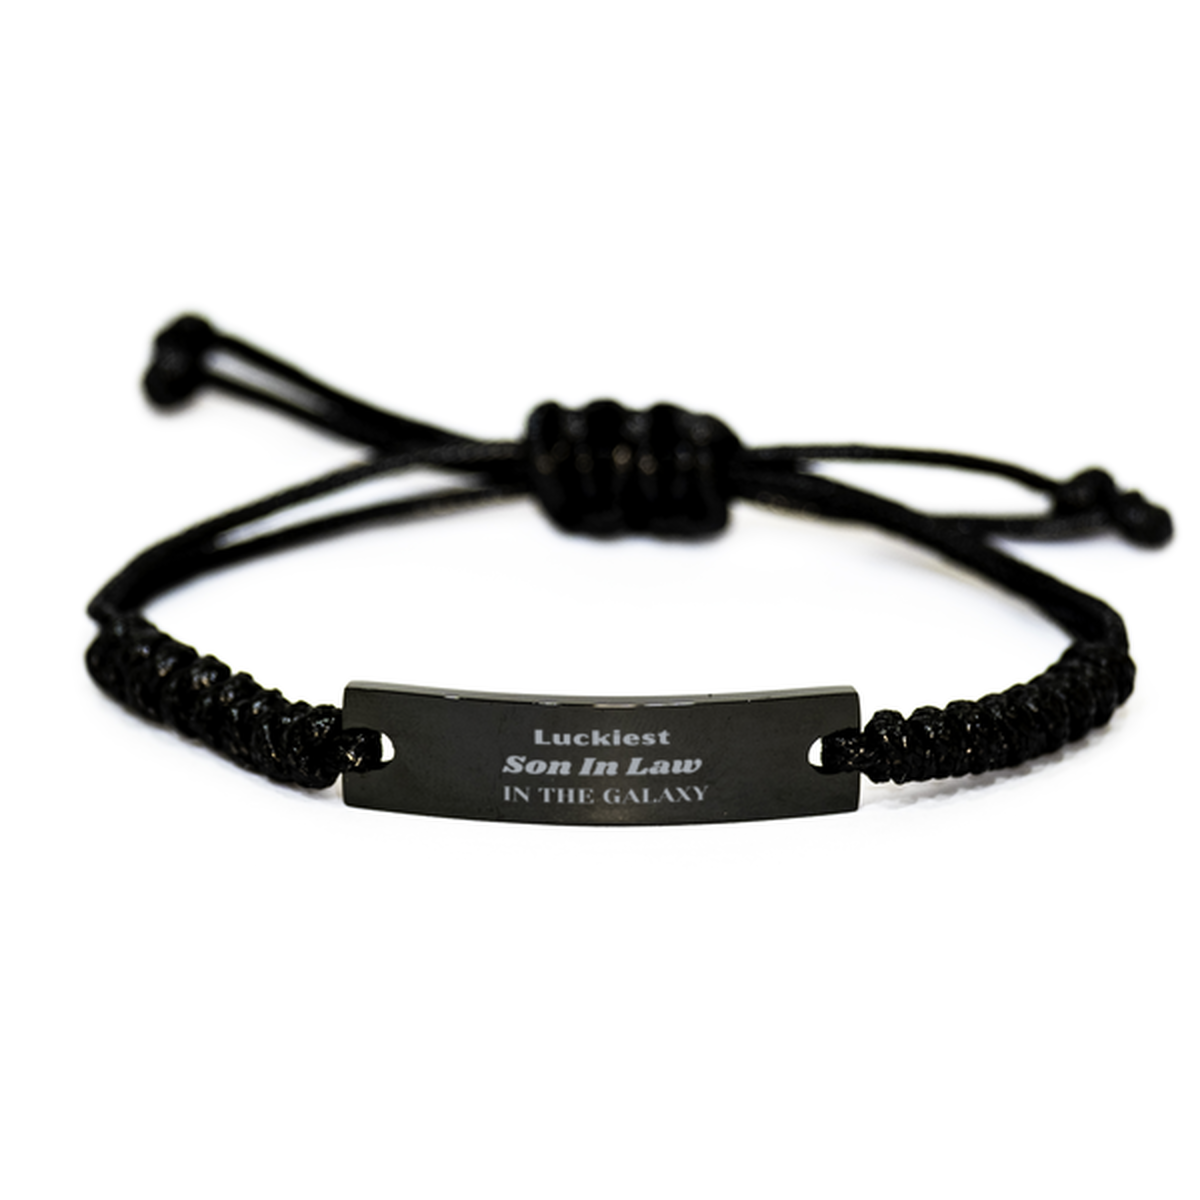 Luckiest Son In Law in the Galaxy, To My Son In Law Engraved Gifts, Christmas Son In Law Black Rope Bracelet Gifts, X-mas Birthday Unique Gifts For Son In Law Men Women